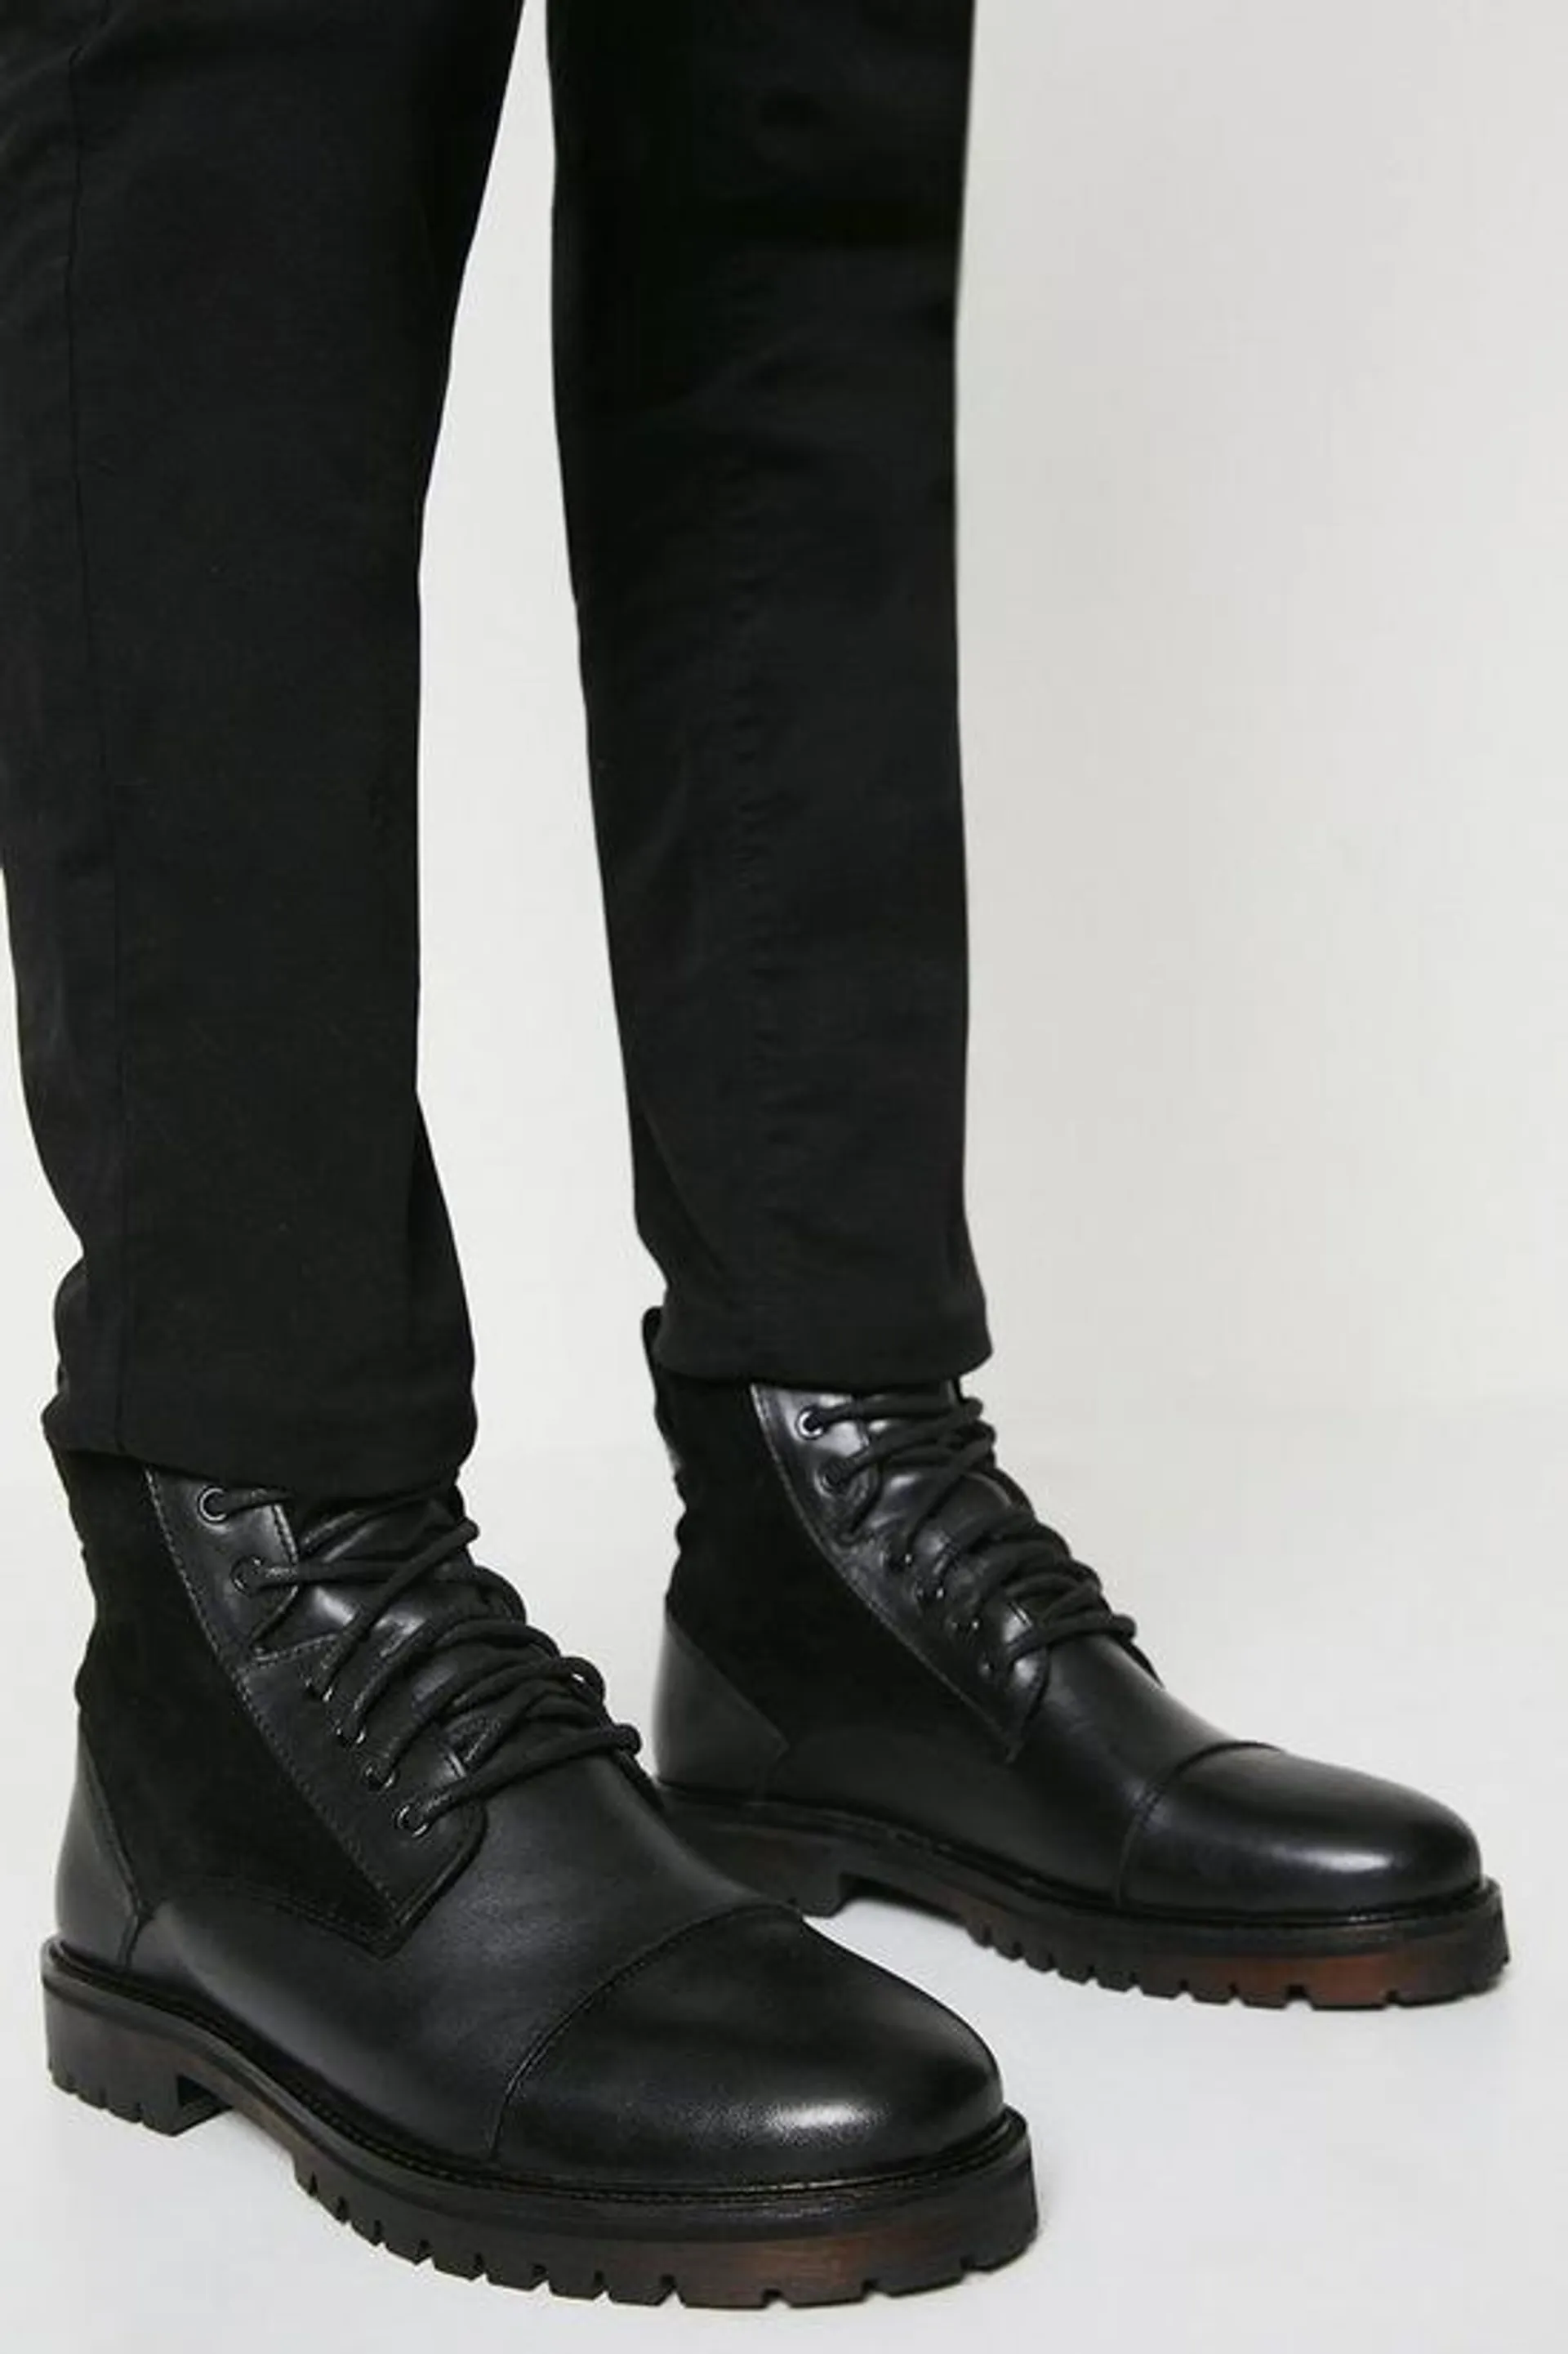 Brighton Mix Material Lace Up Cleated Boots